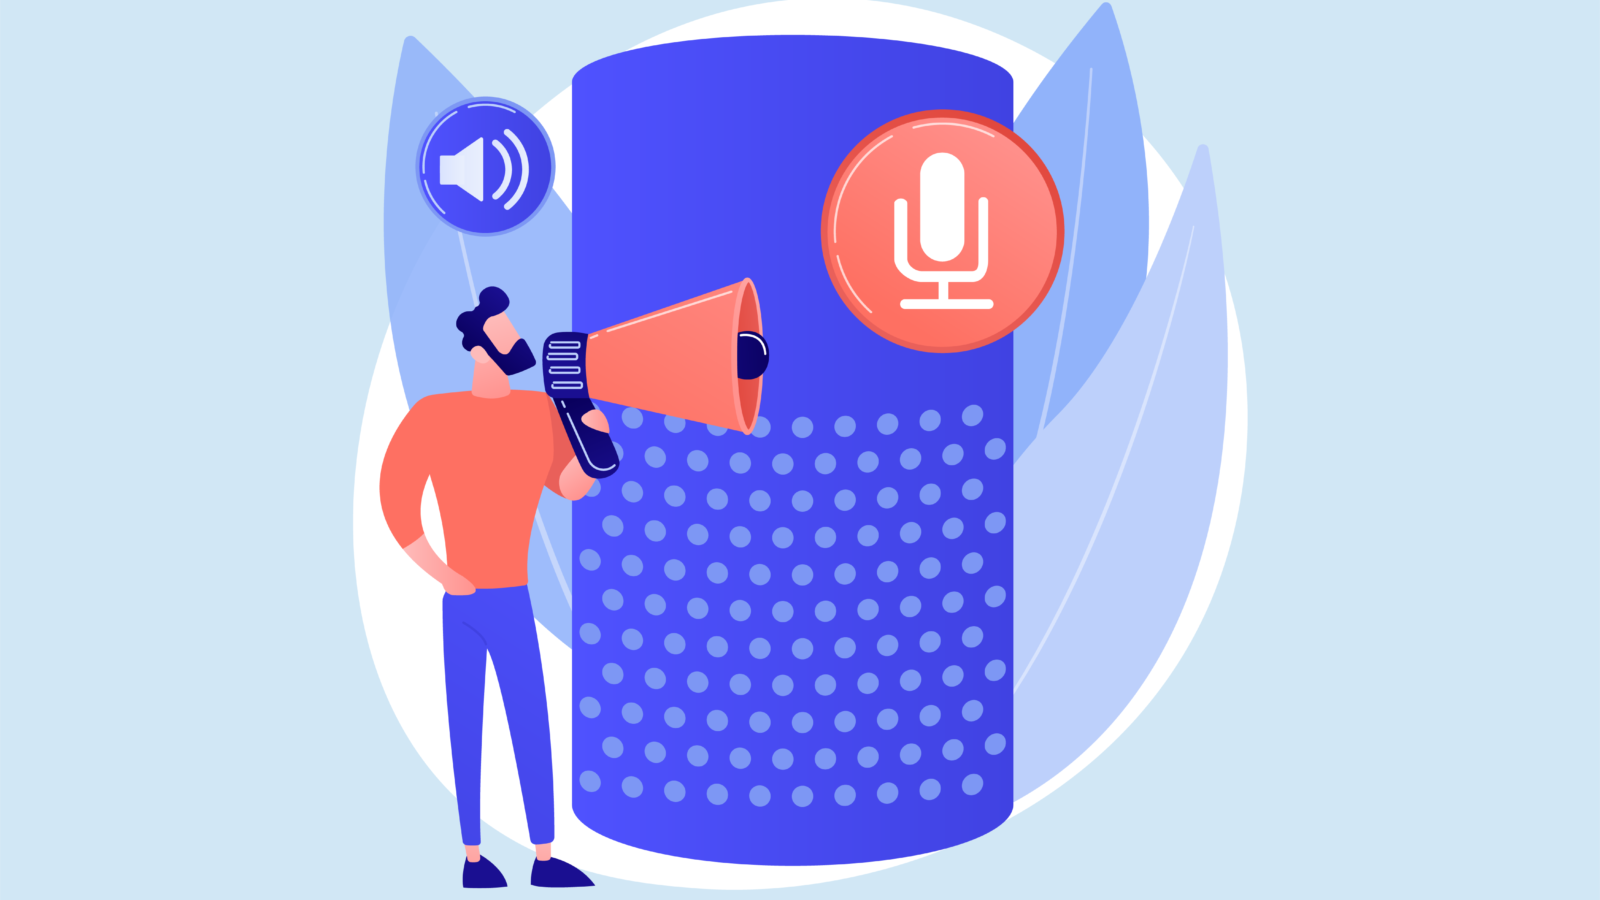 Amplify Your Voice with mirro AI